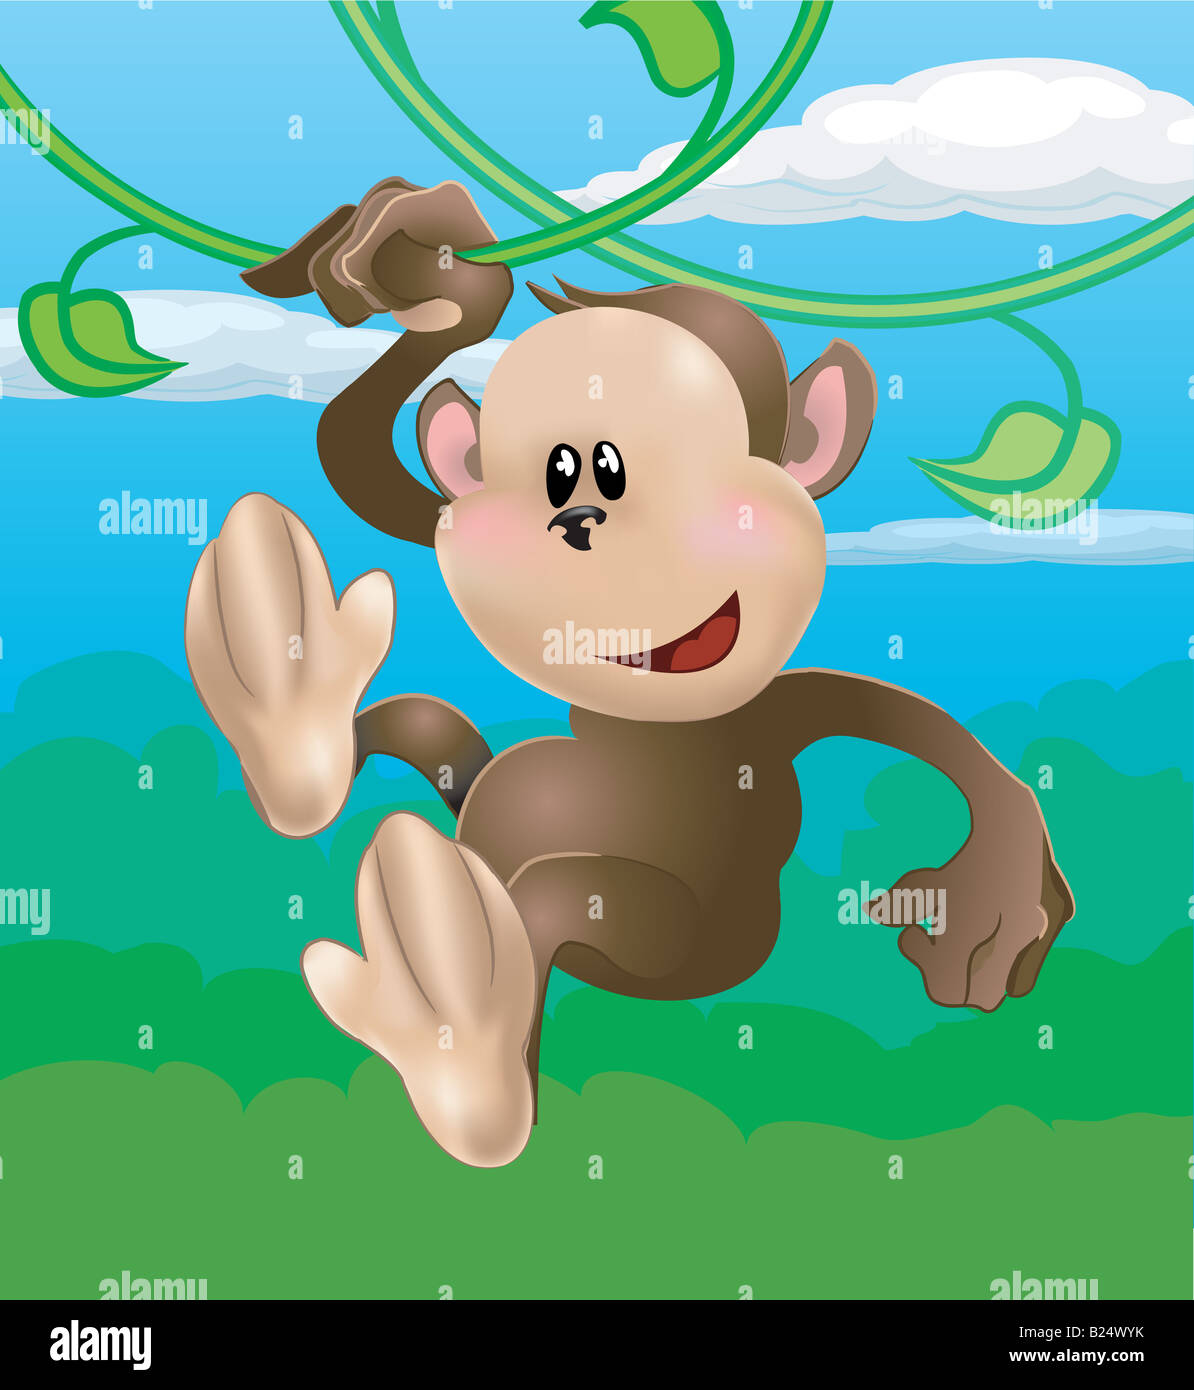 A cute monkey swinging through the trees Stock Photo